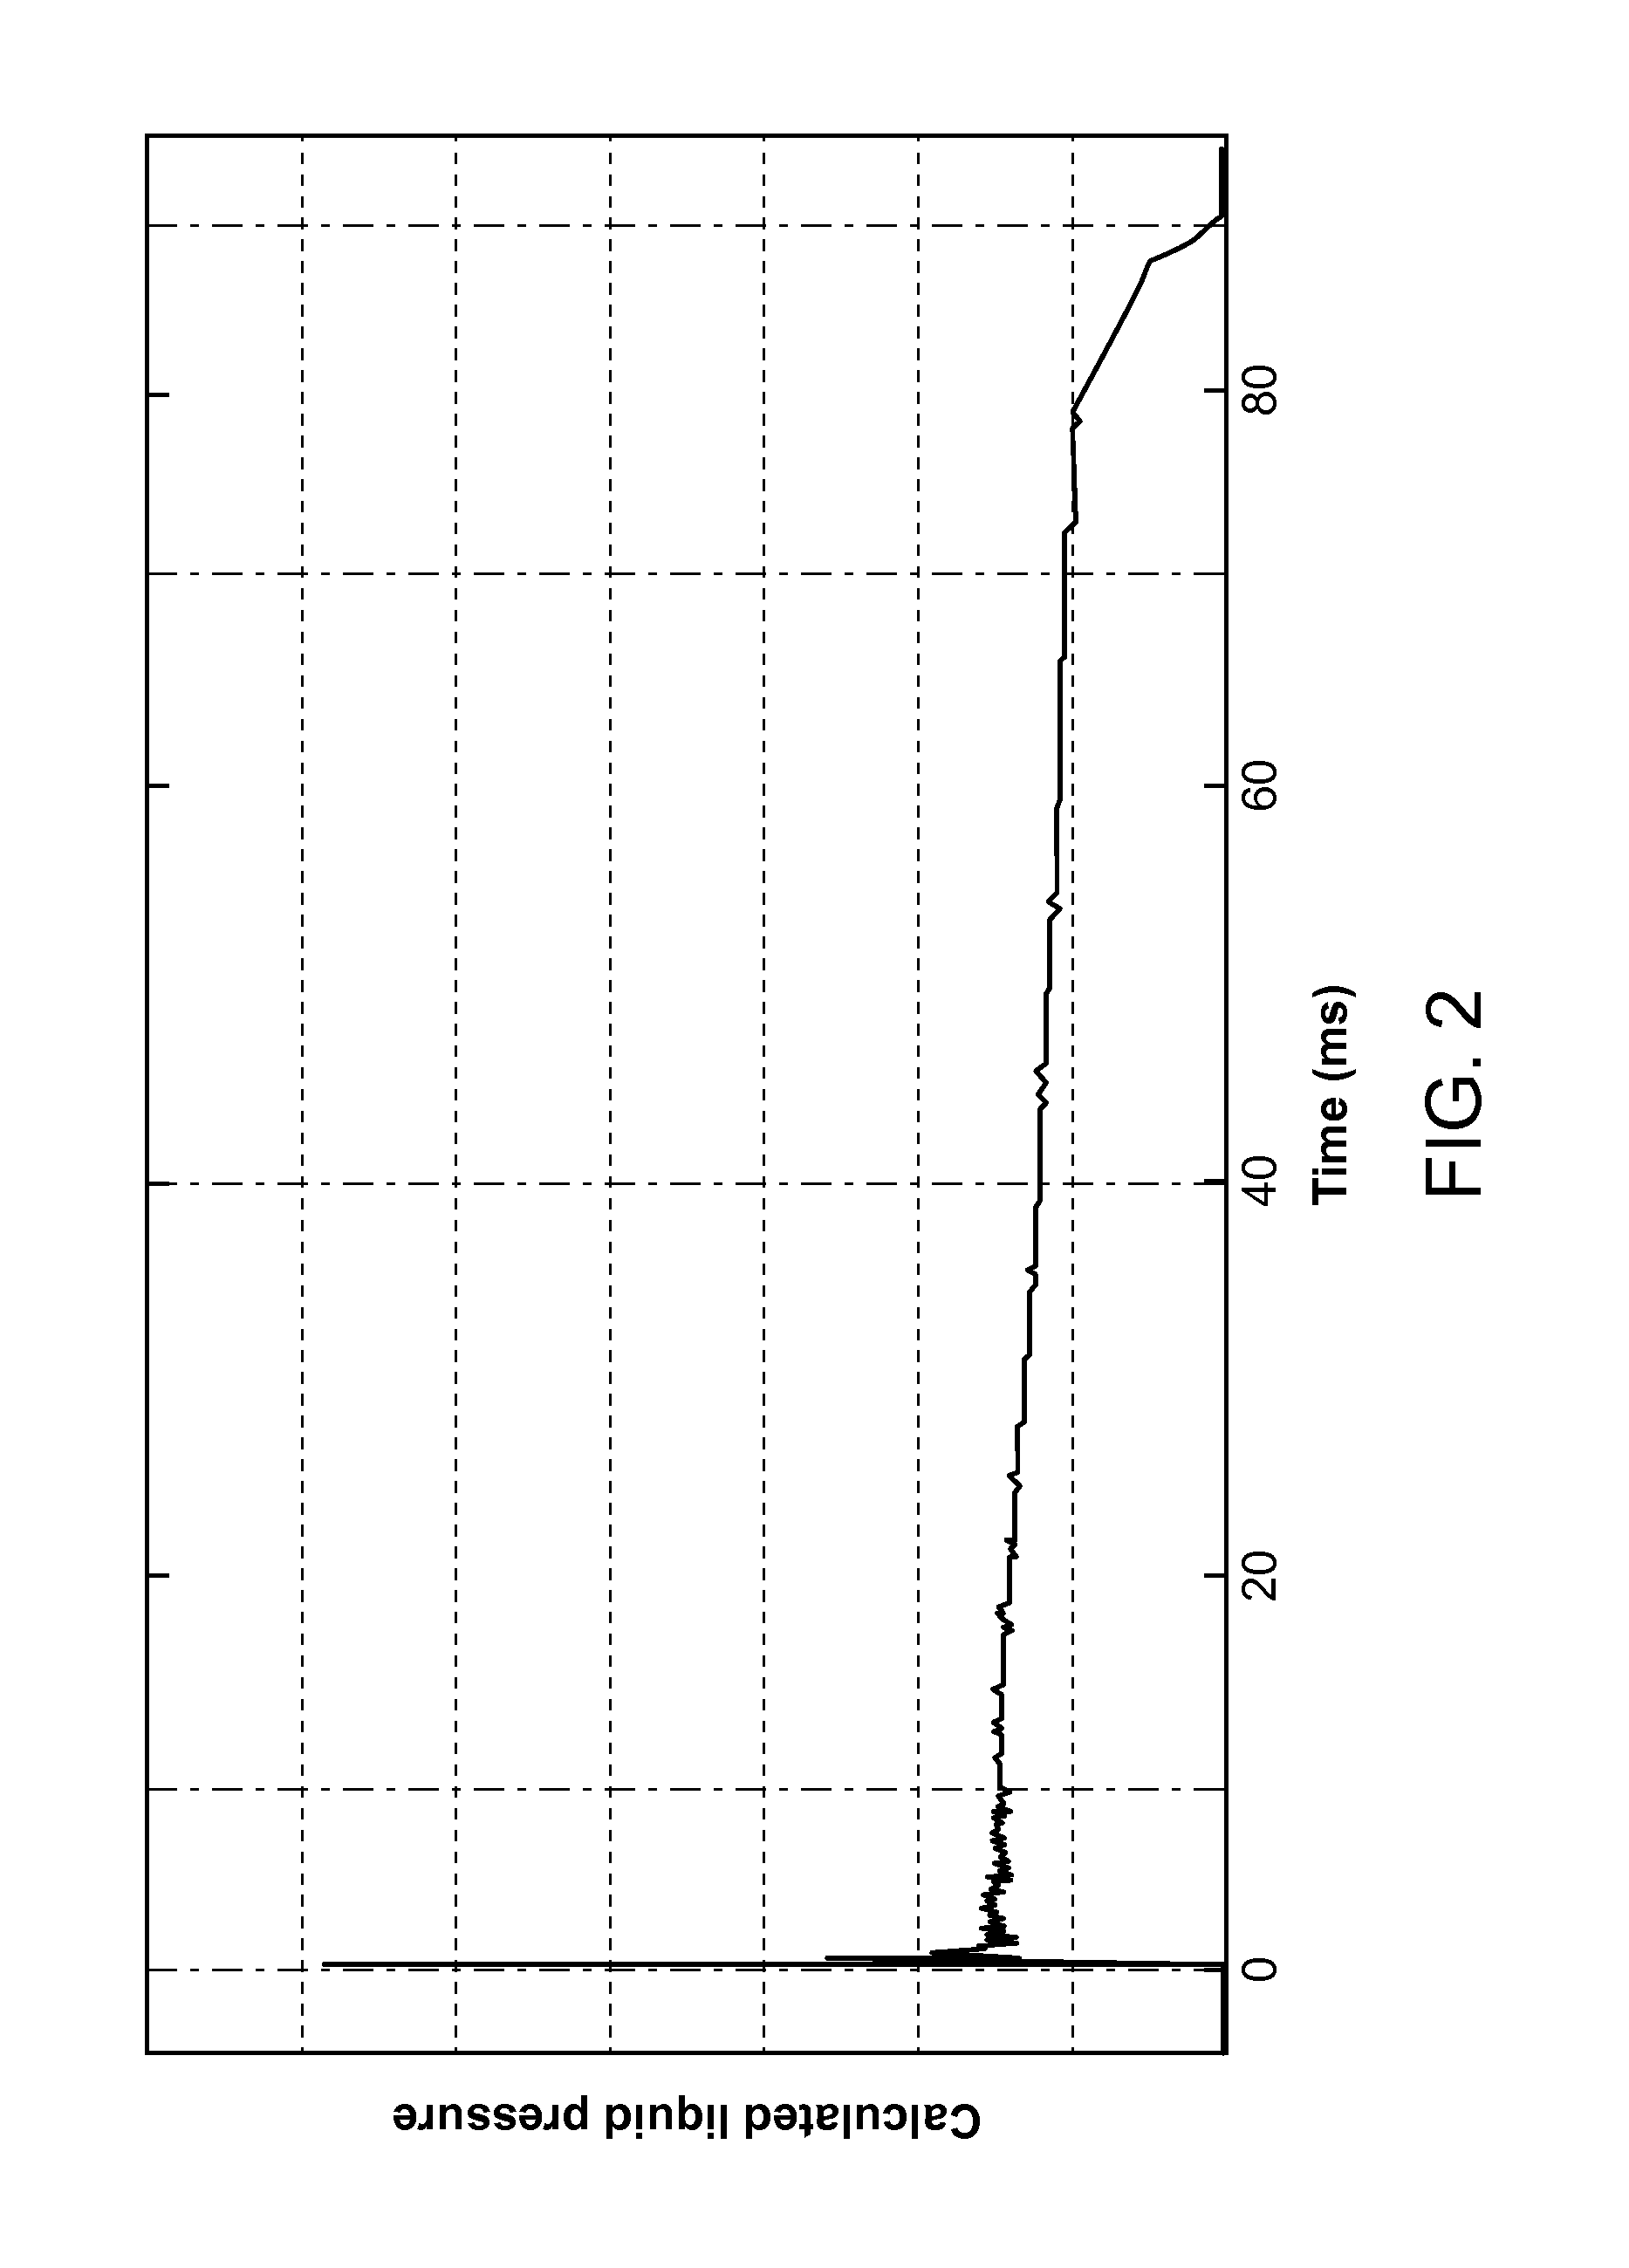 Needle-free injectors and design parameters thereof that optimize injection performance